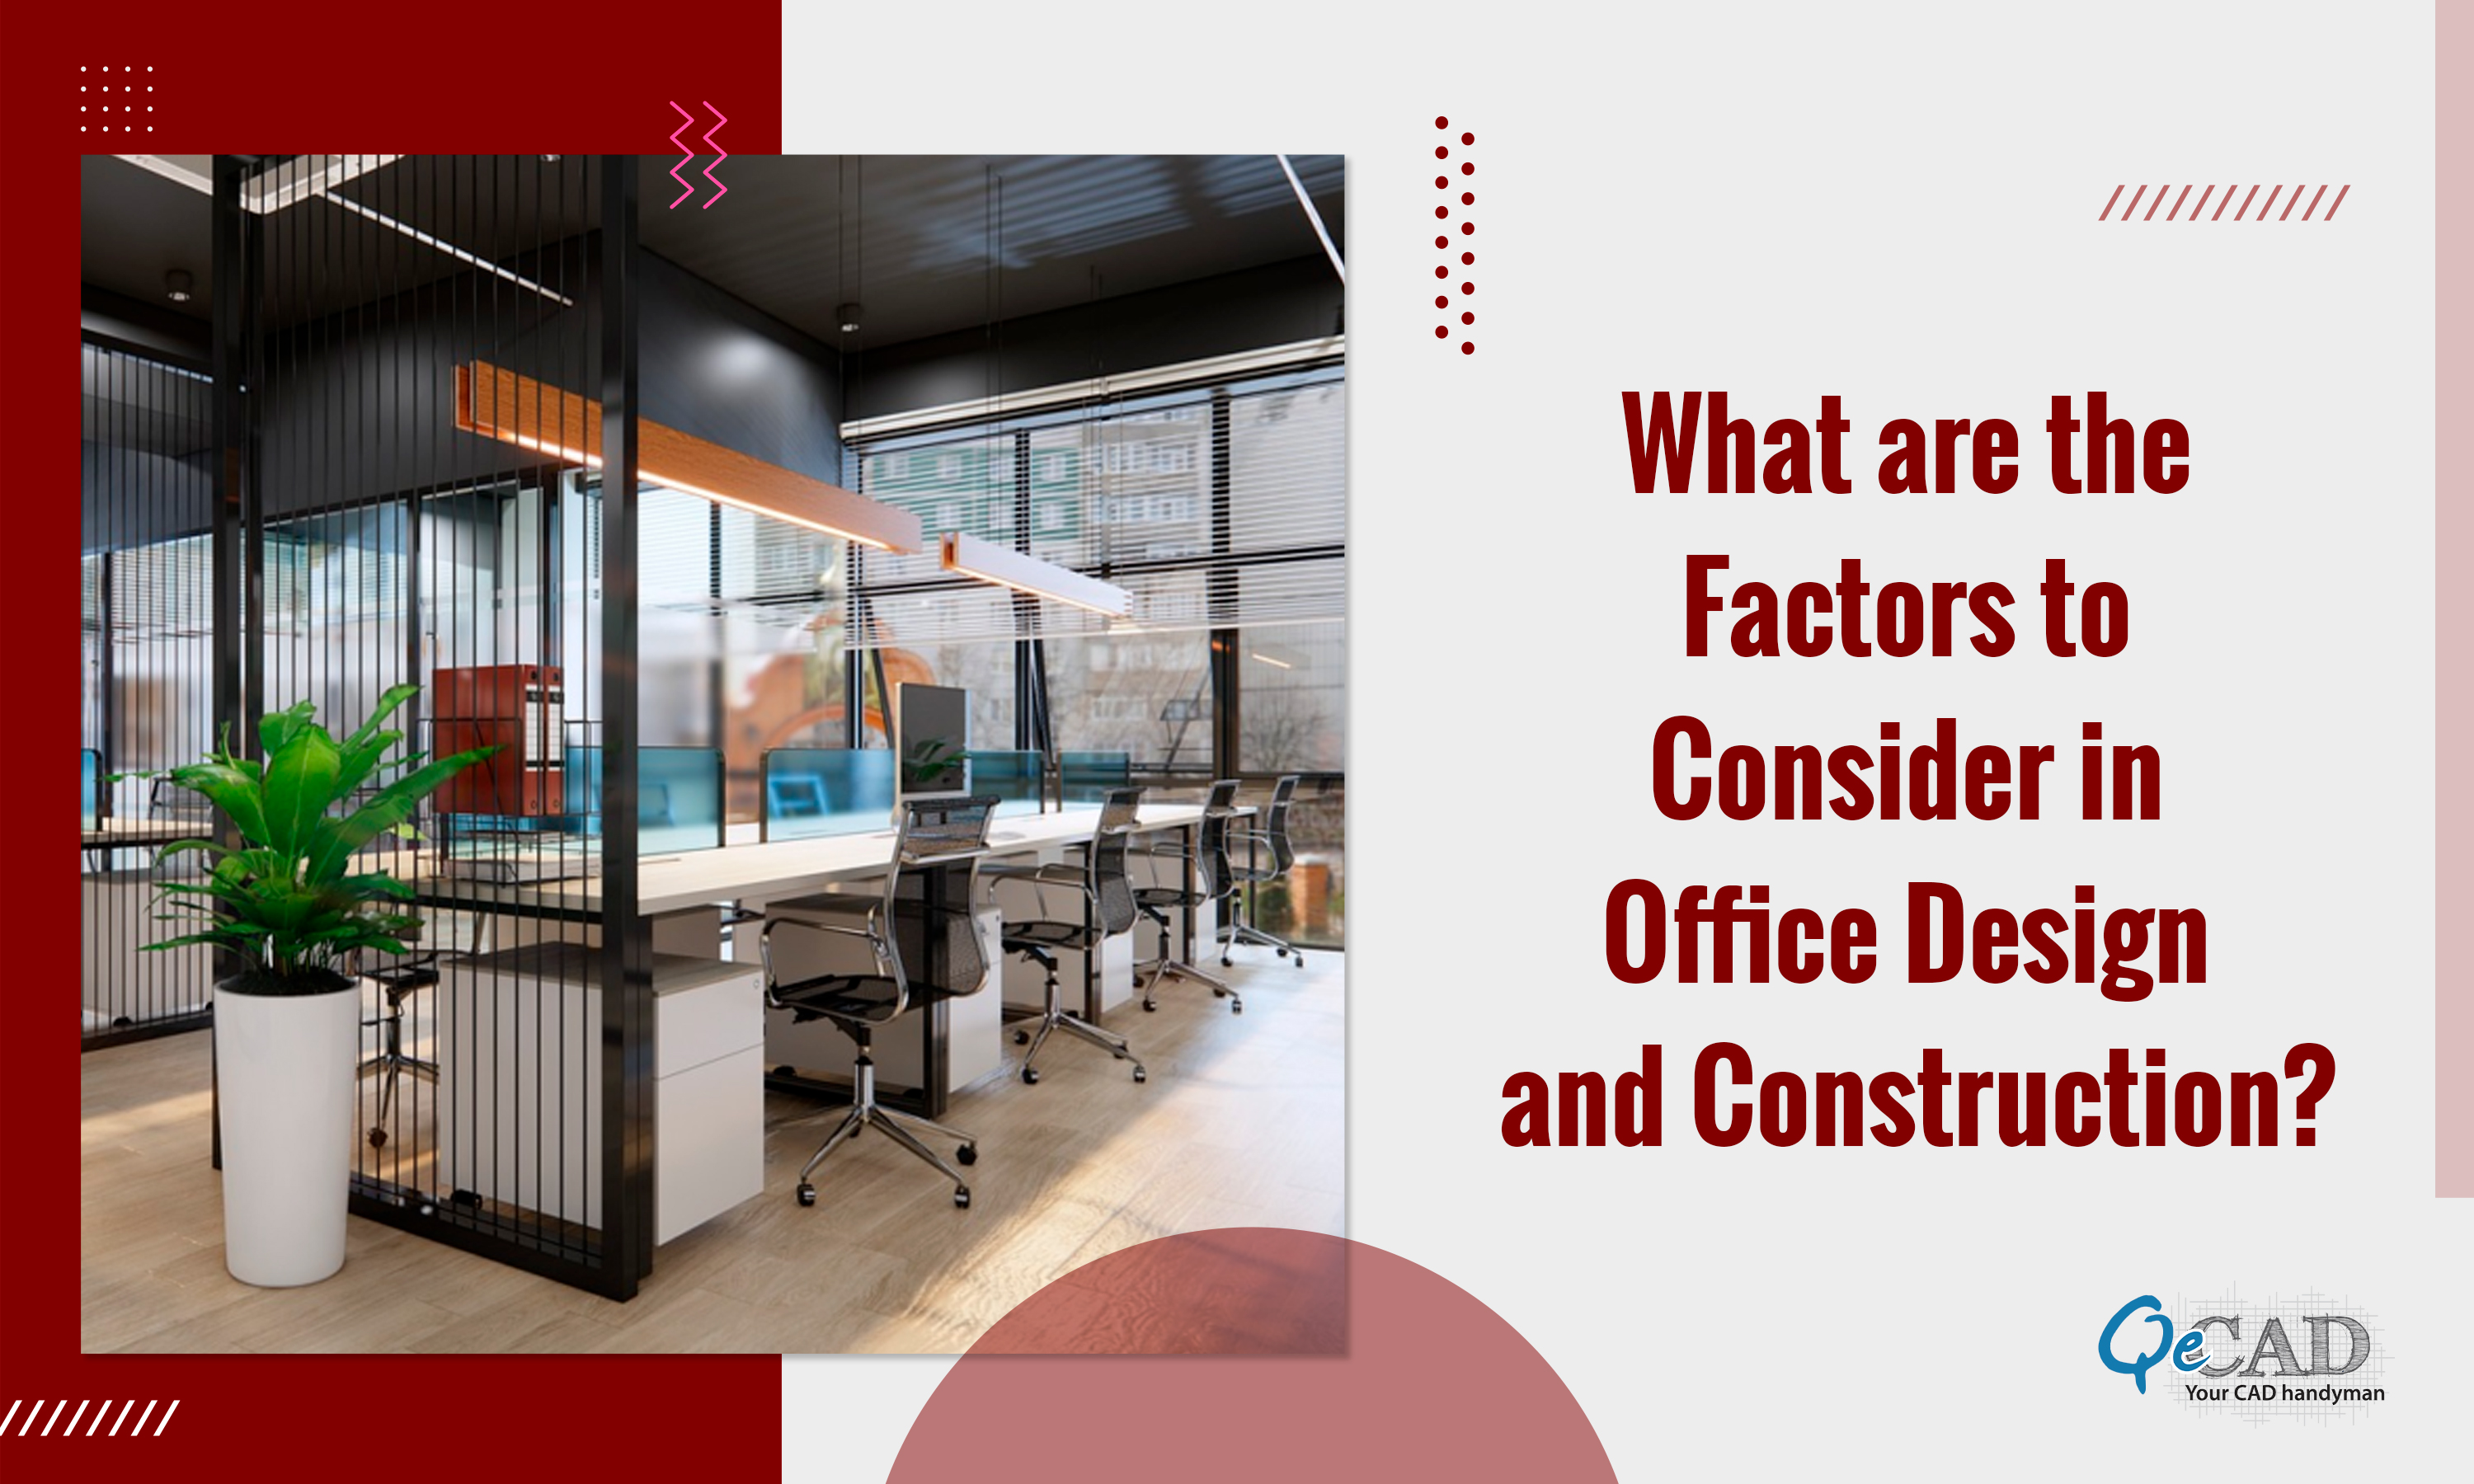 What are the Factors to Consider in Office Design and Construction?